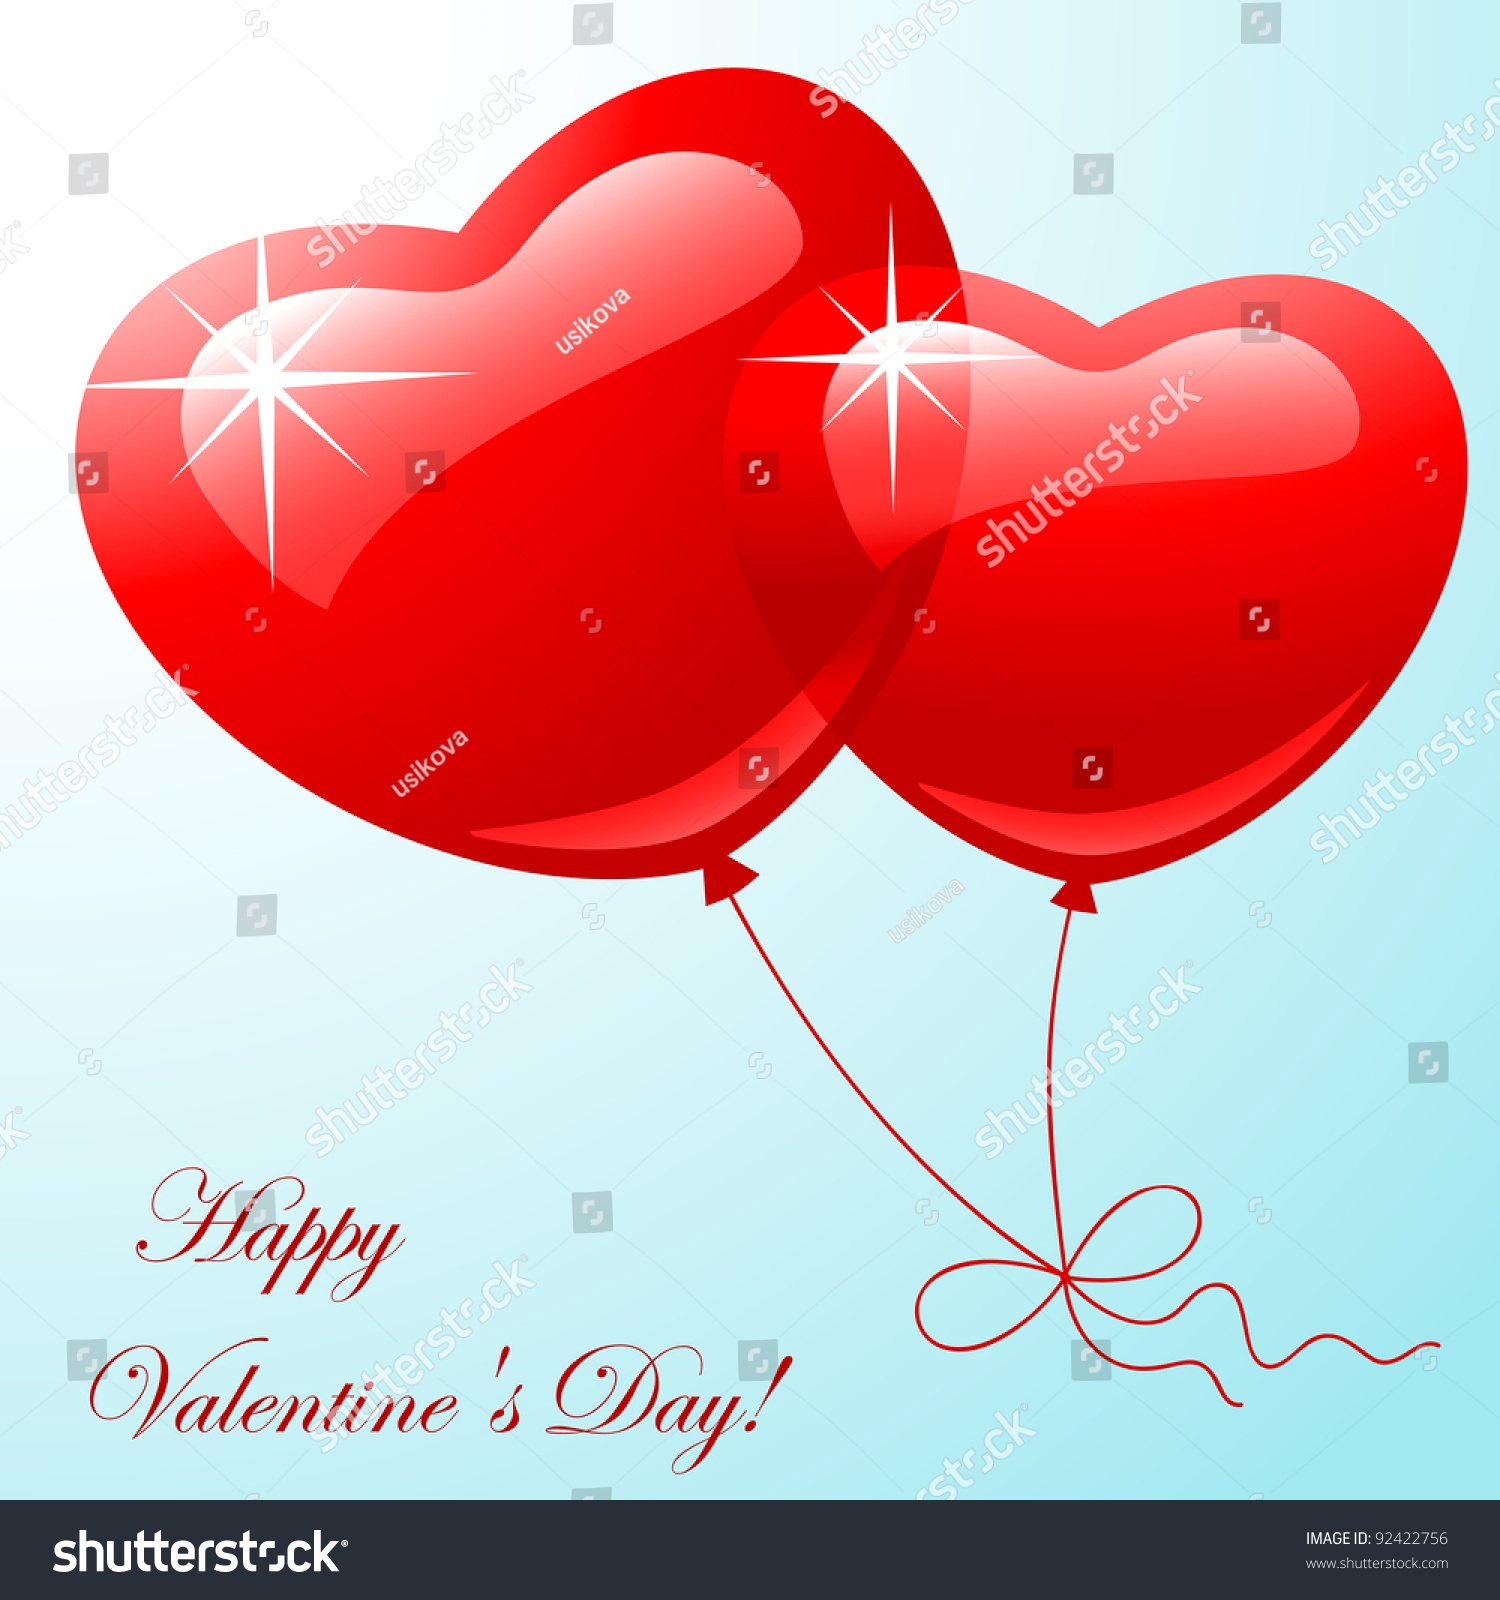 Valentine greeting card - happy valentine day. Red two balloon in shape hearts on a blue background.  Vector illustration #92422756